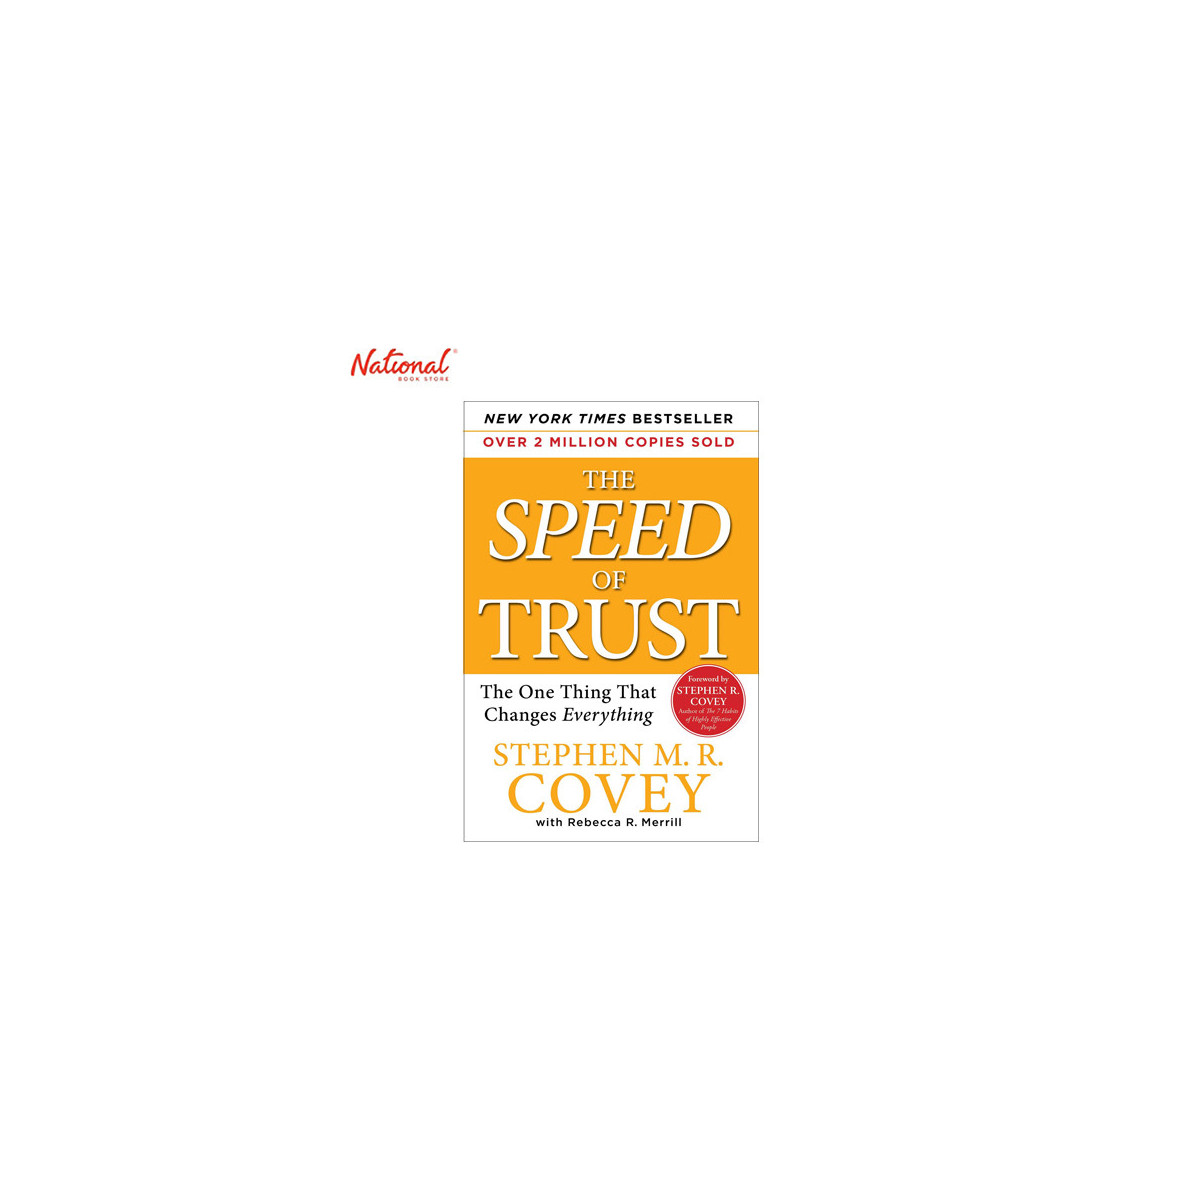 The Speed of Trust: The One Thing That Changes Everything Trade Paperback by Stephen R. Covey